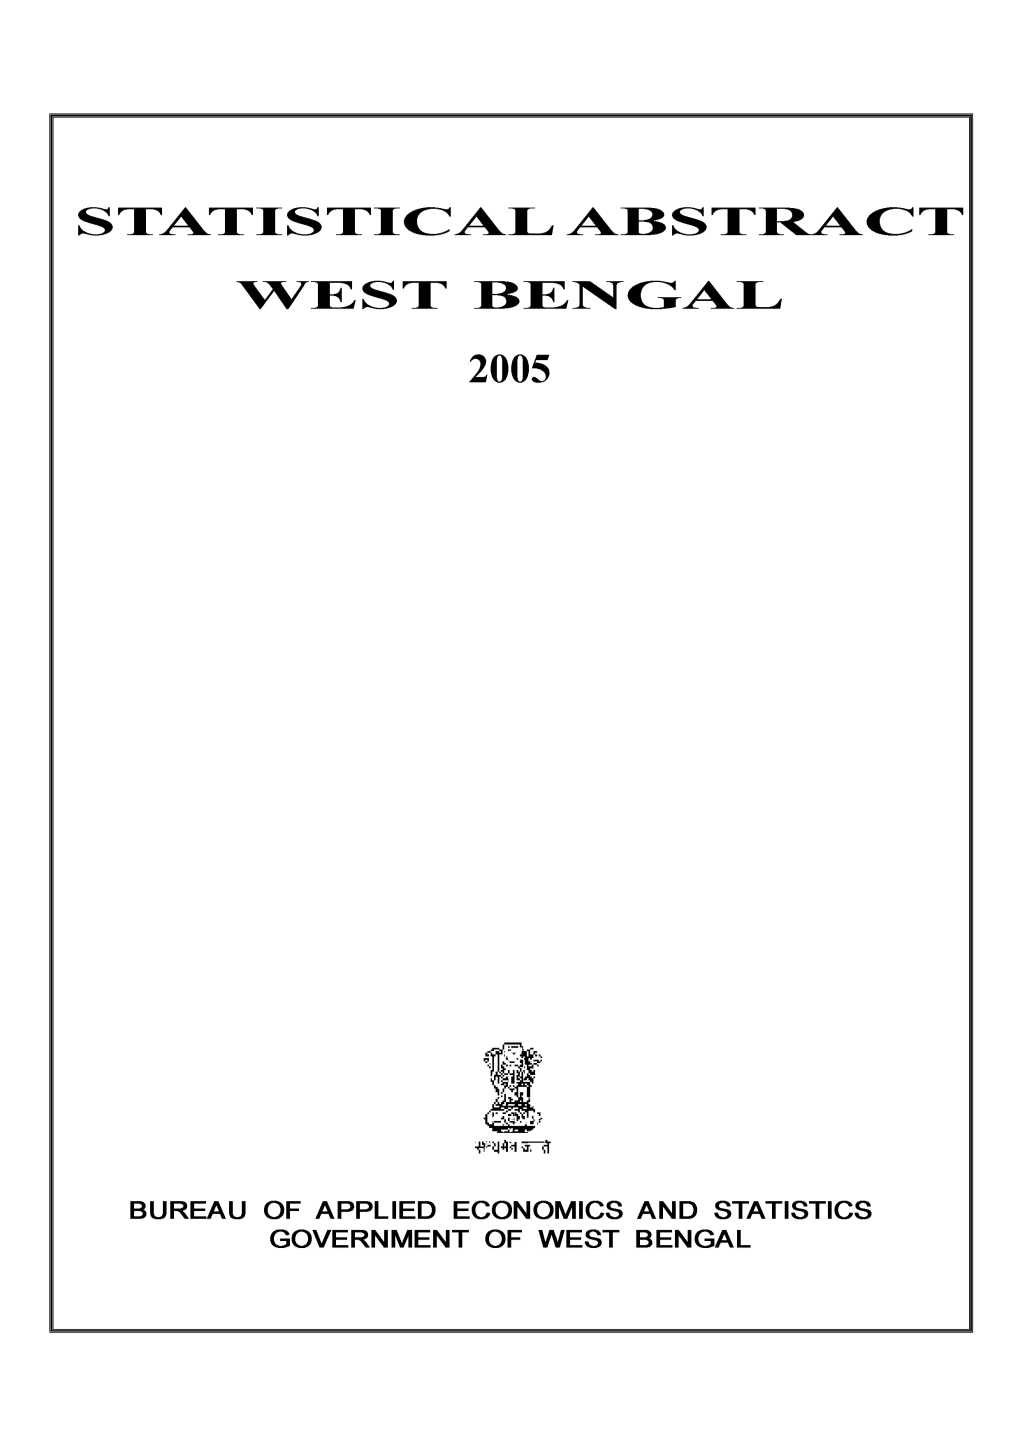 Statistical Abstract Avest Bengal 2005